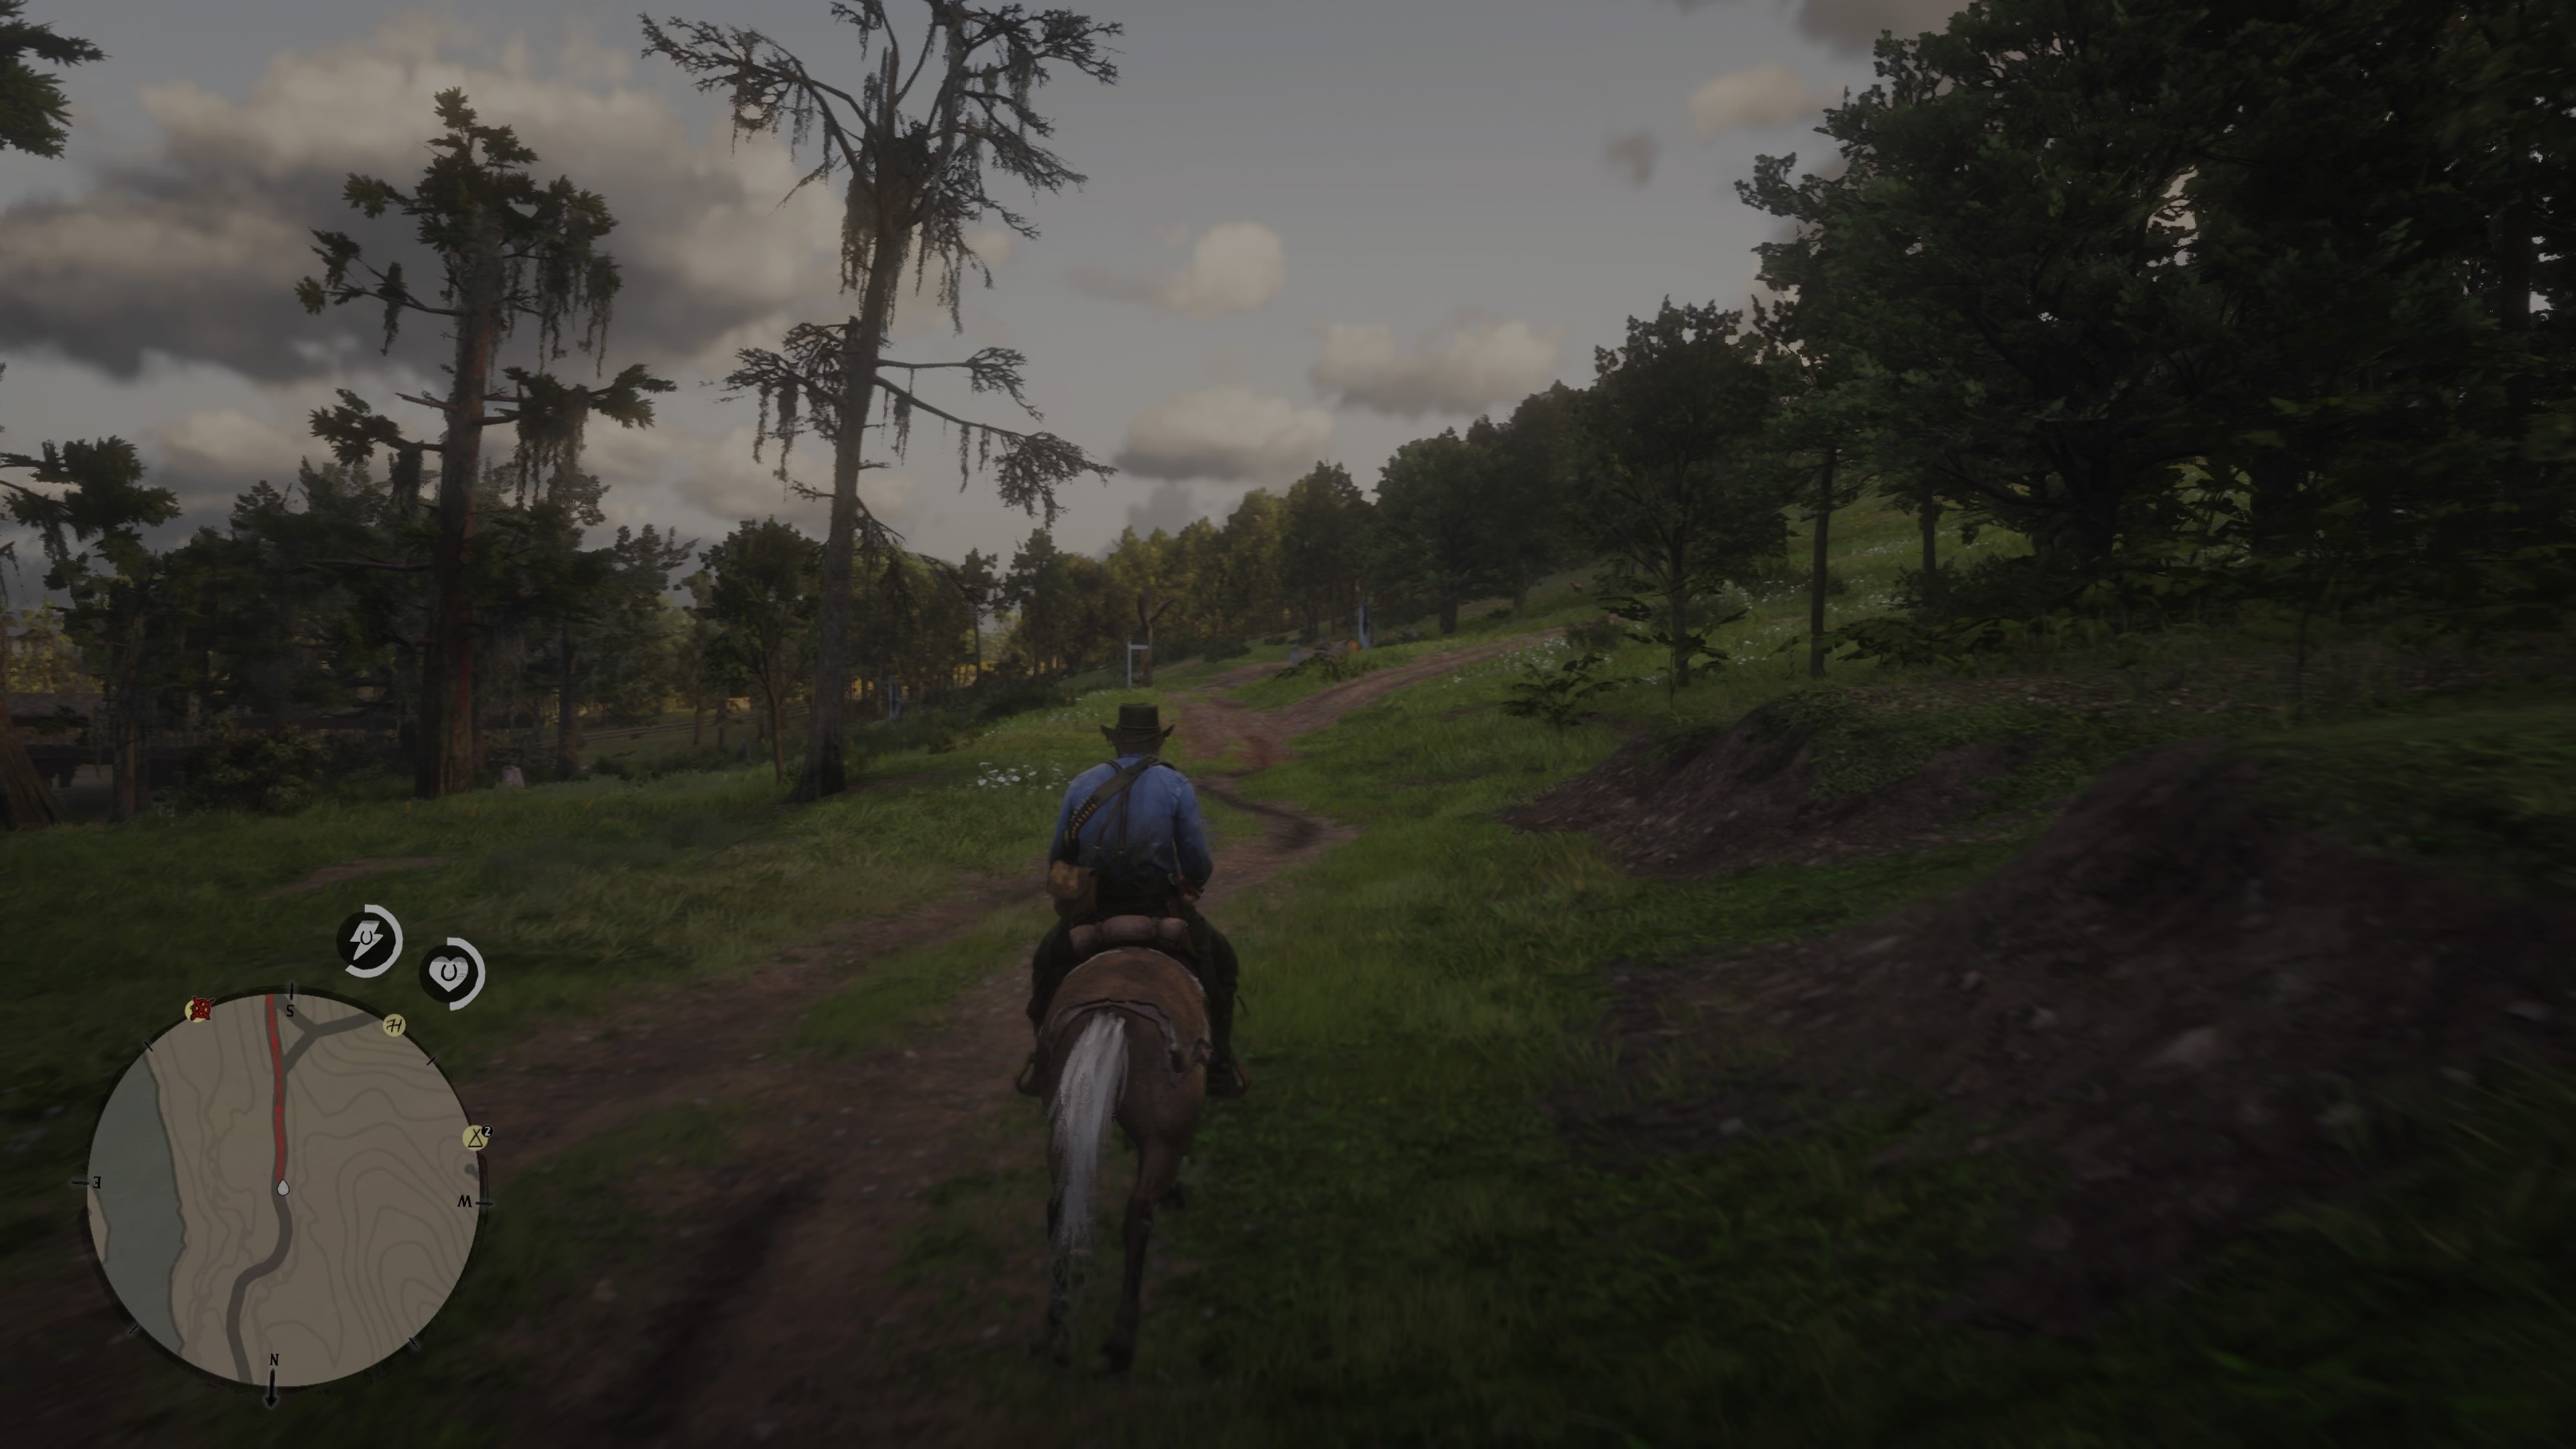 Download Red Dead Redemption 2 free for PC - CCM